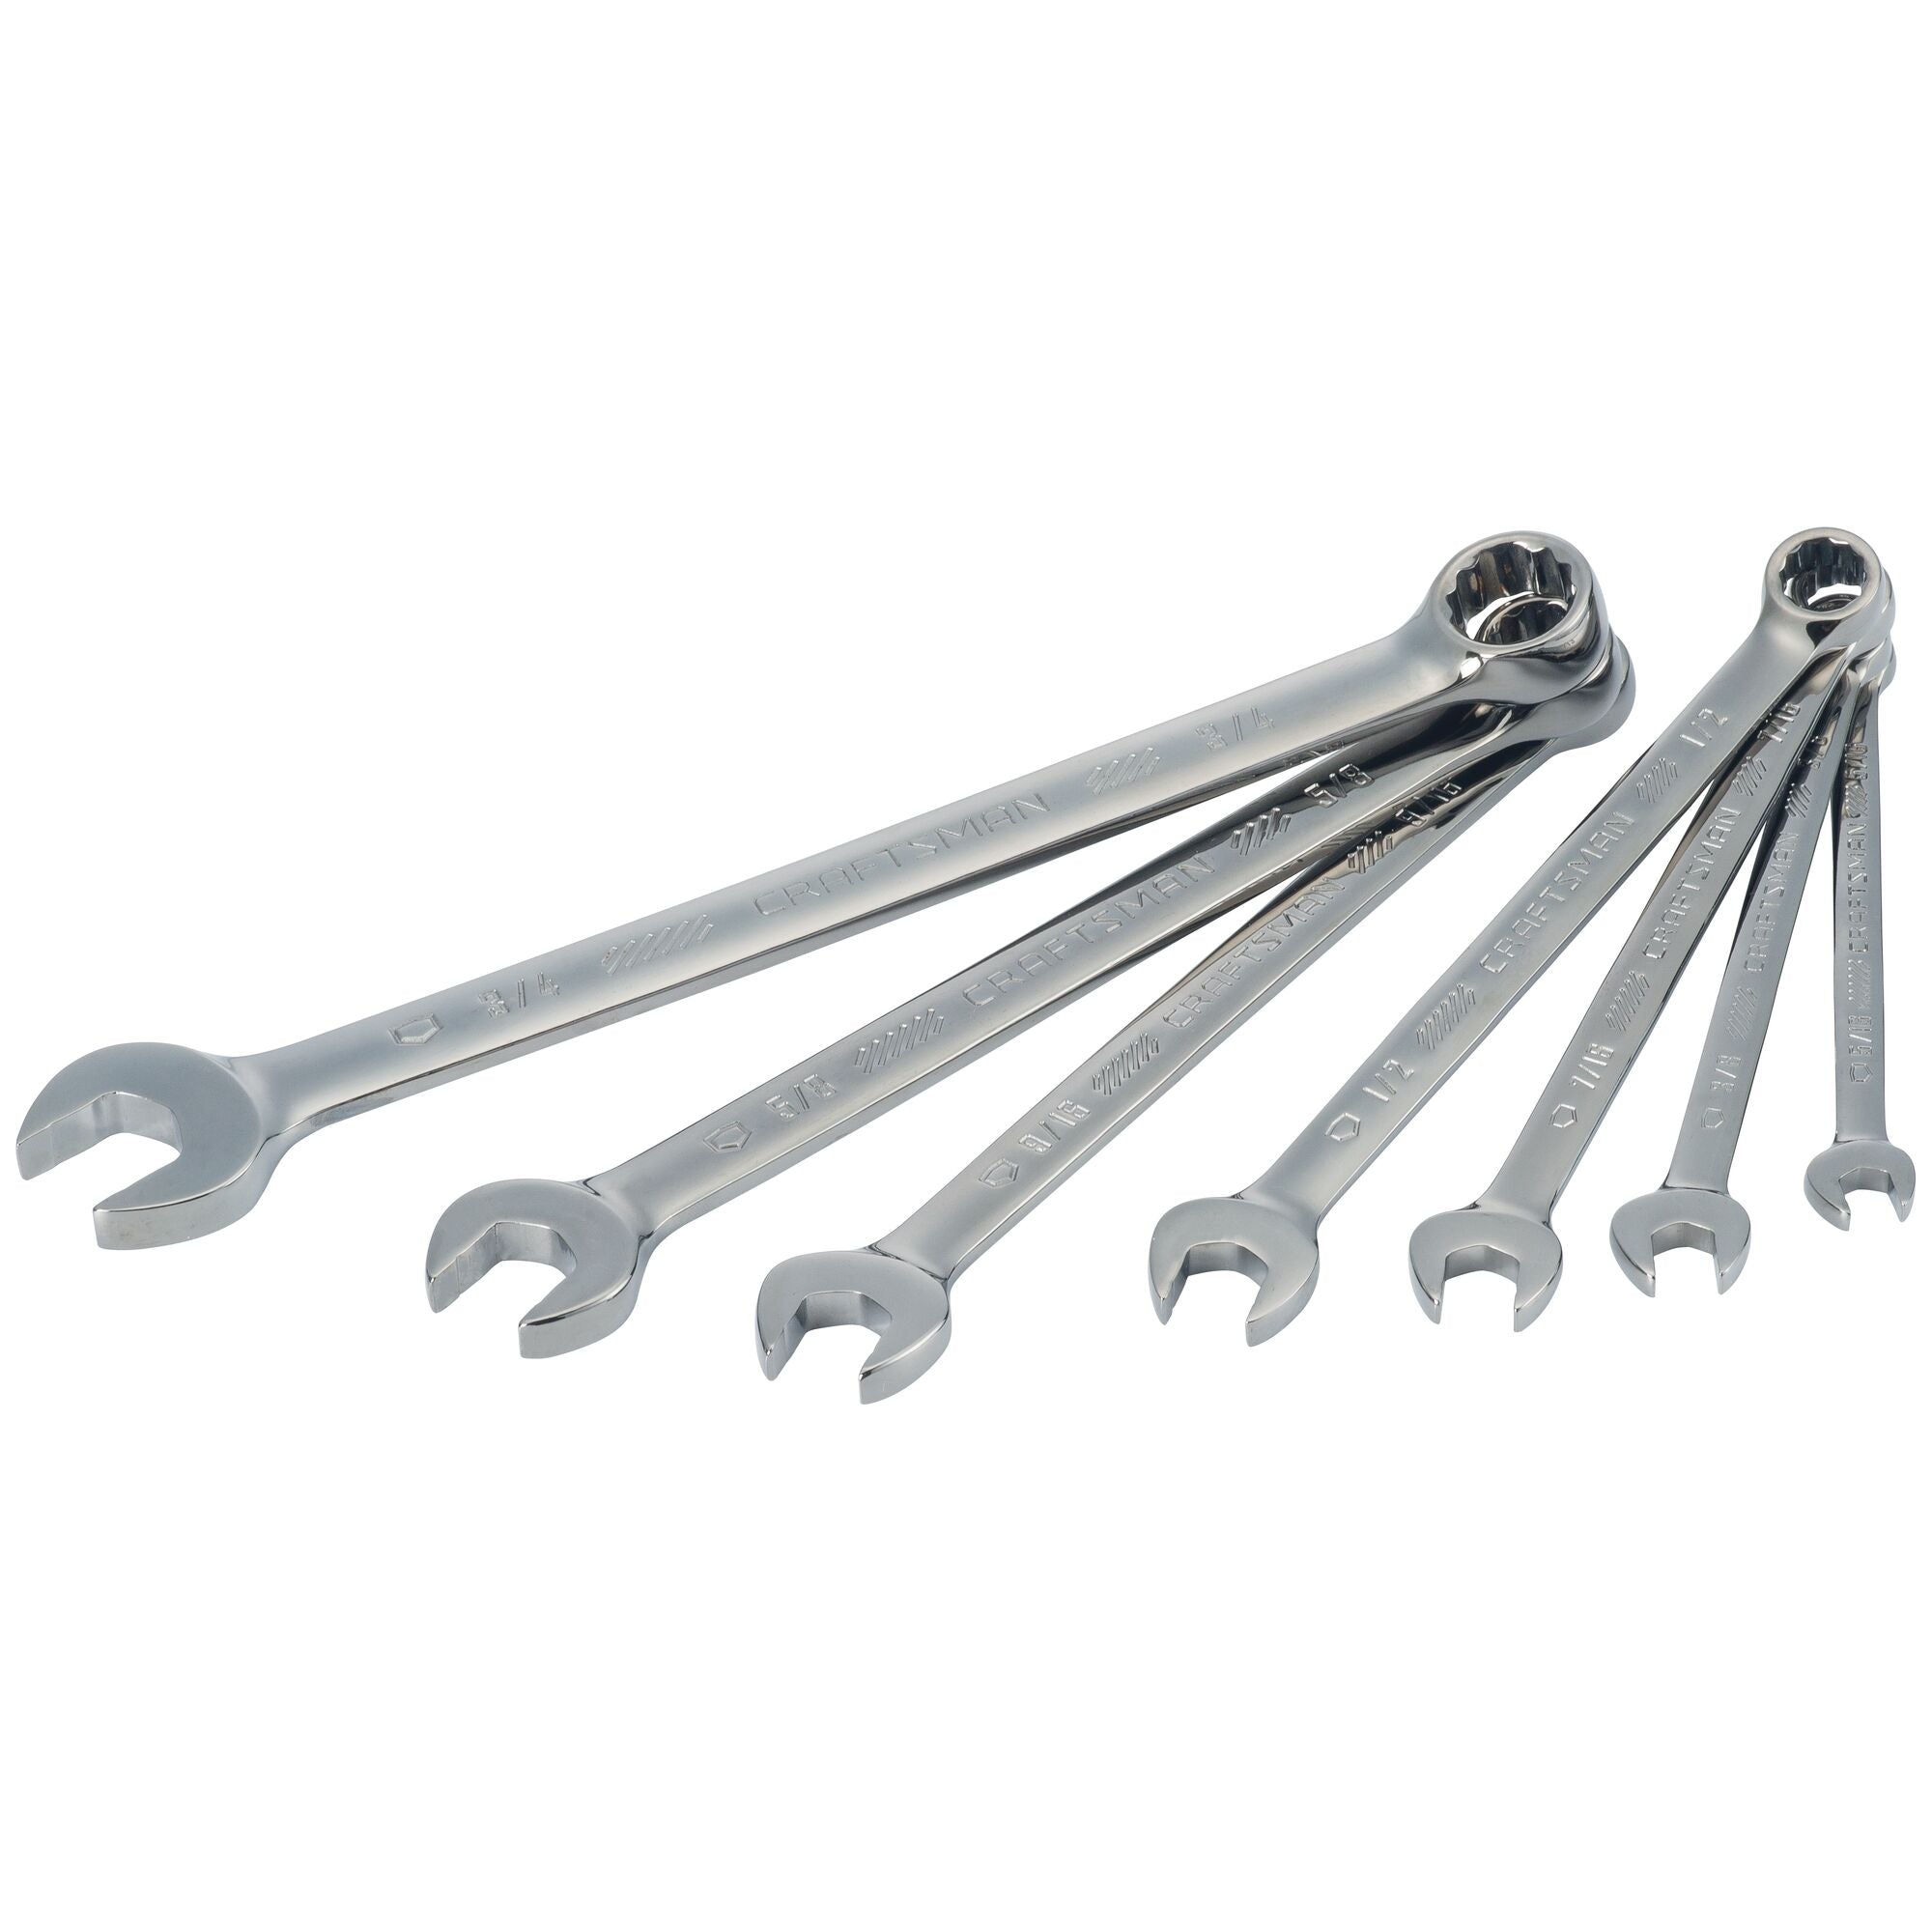 Wright Tool 705 SAE Combination Wrench Set, 7-Piece